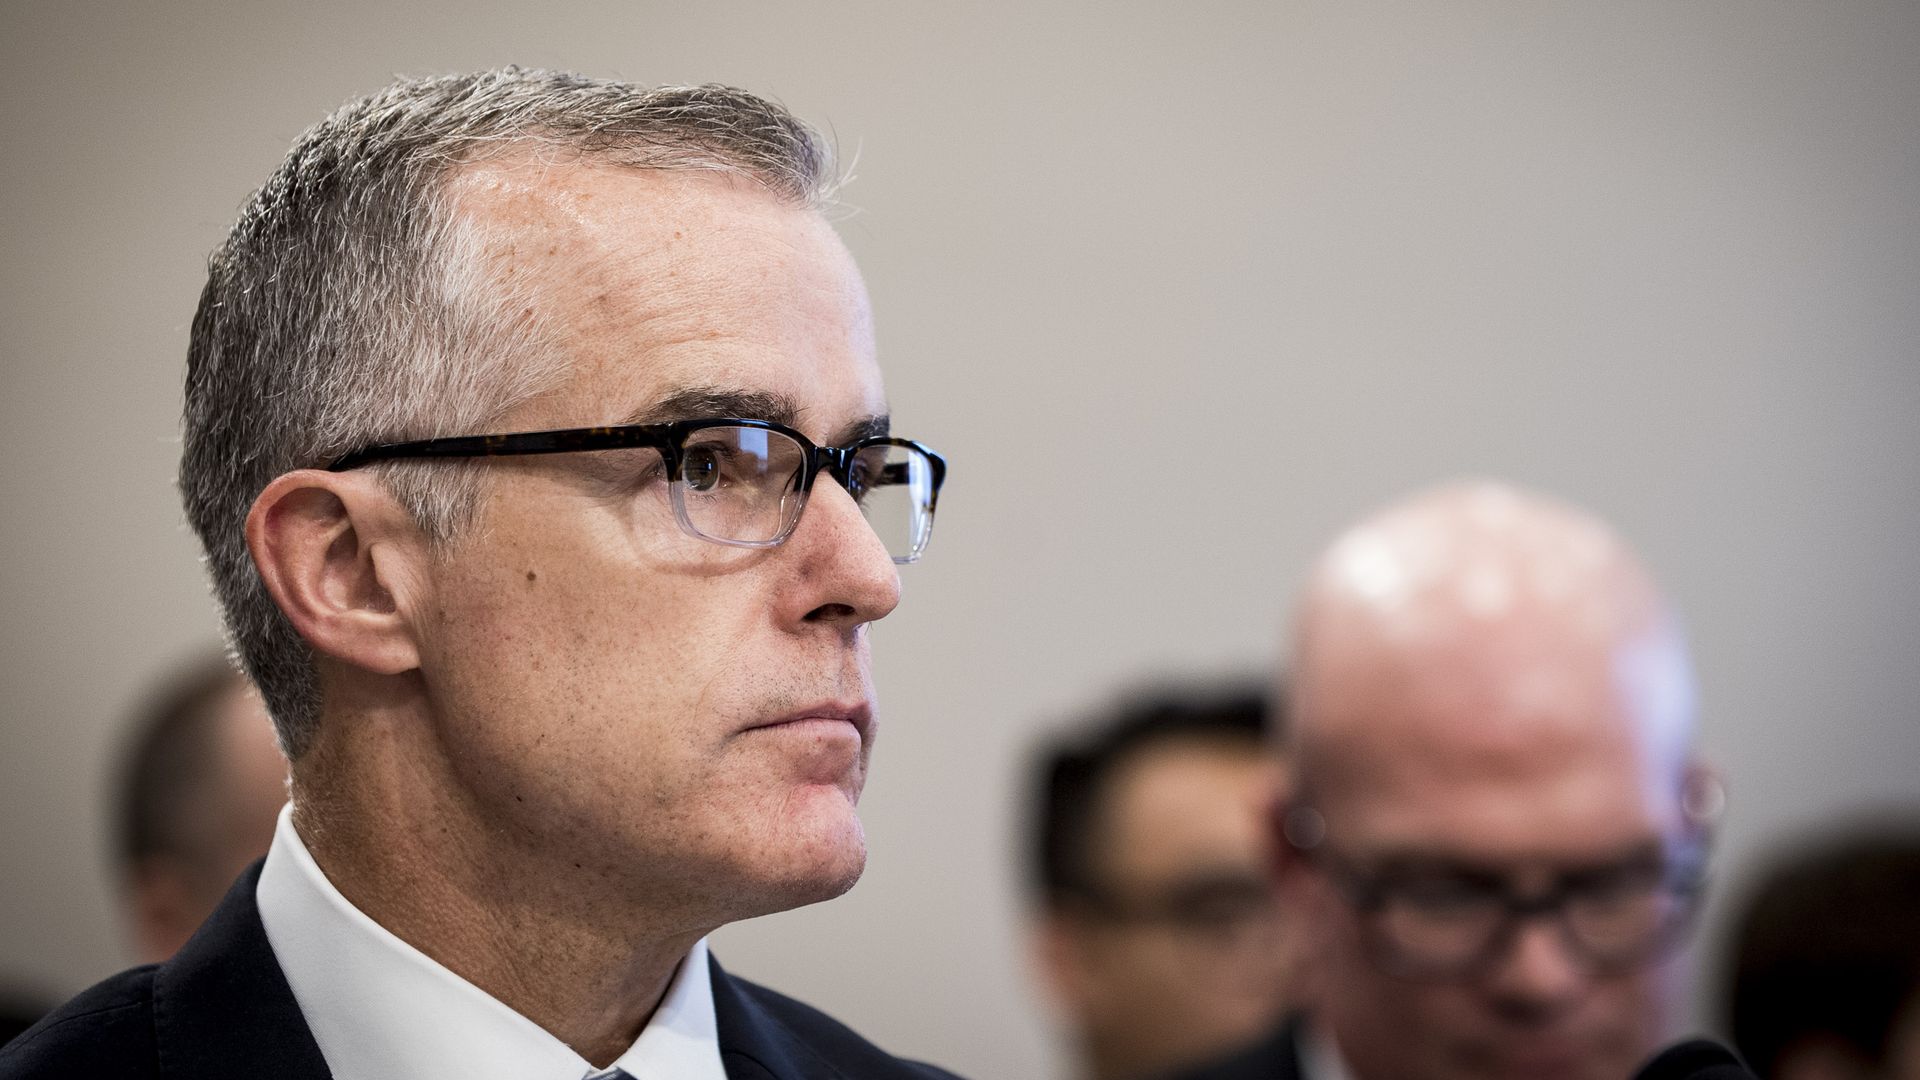 Then-acting FBI Director Andrew McCabe testifying before a House subcommittee in June 2017.